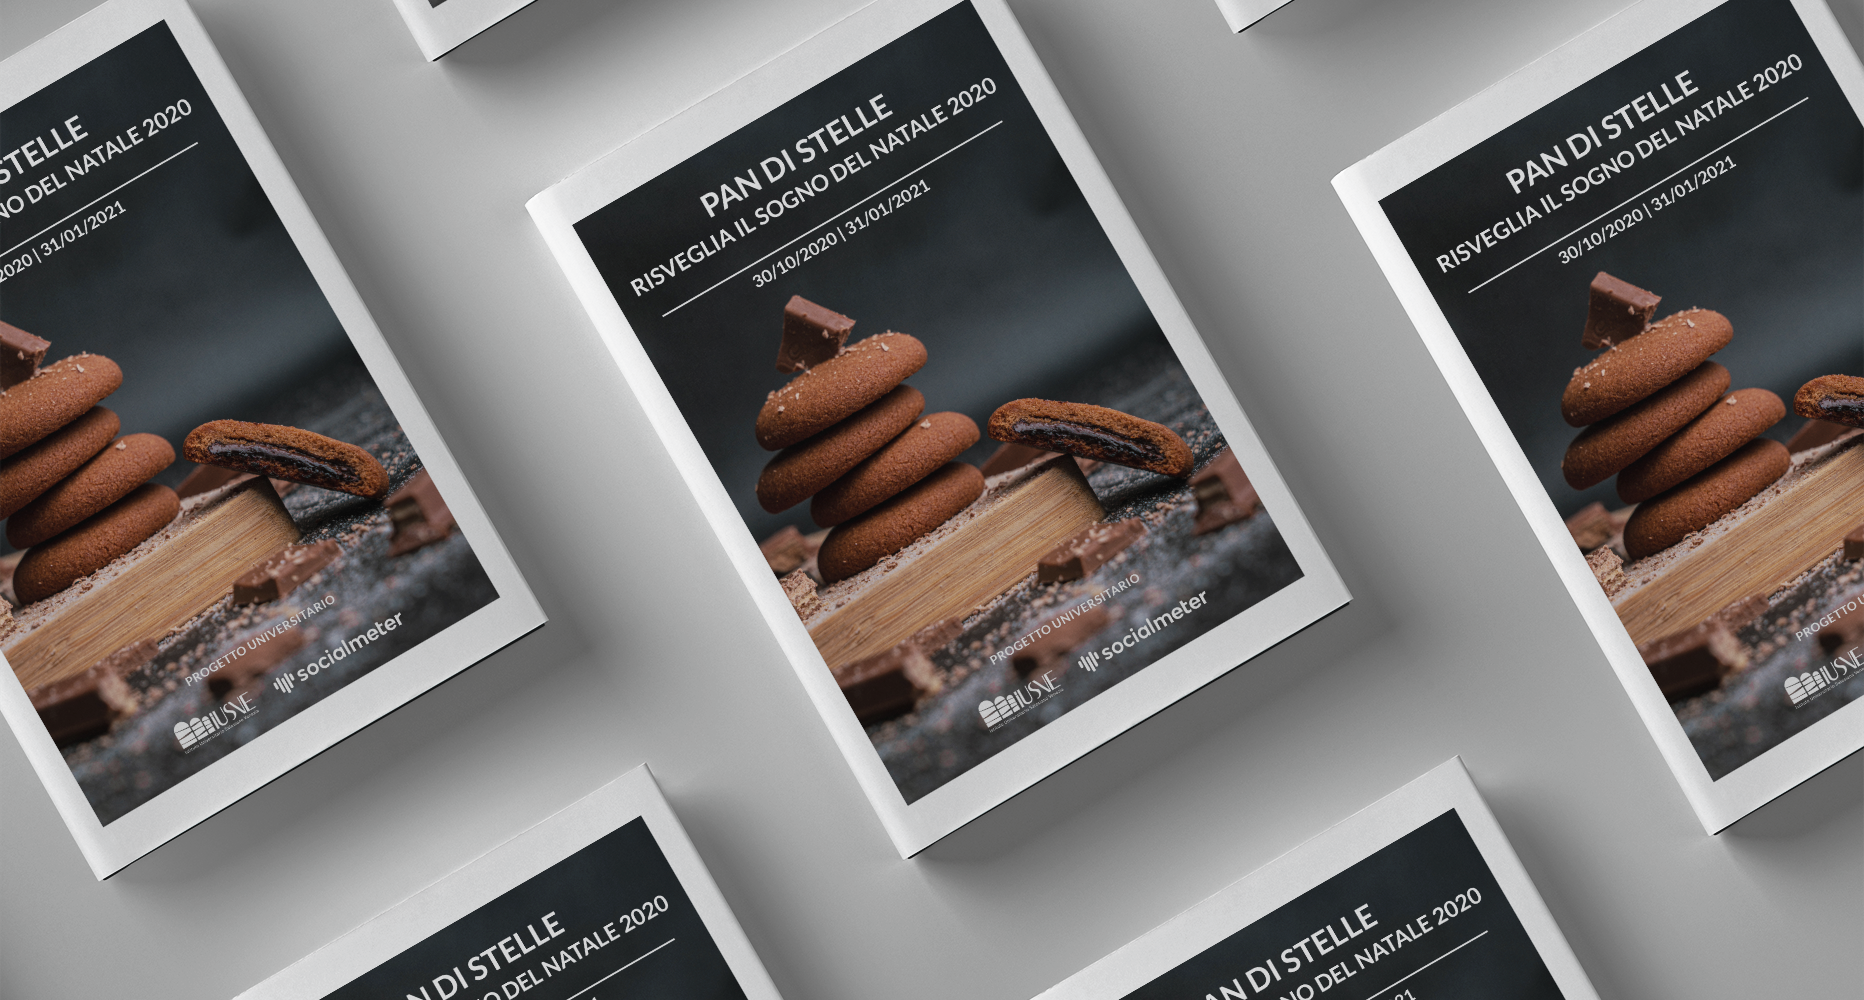 pandistelle cover